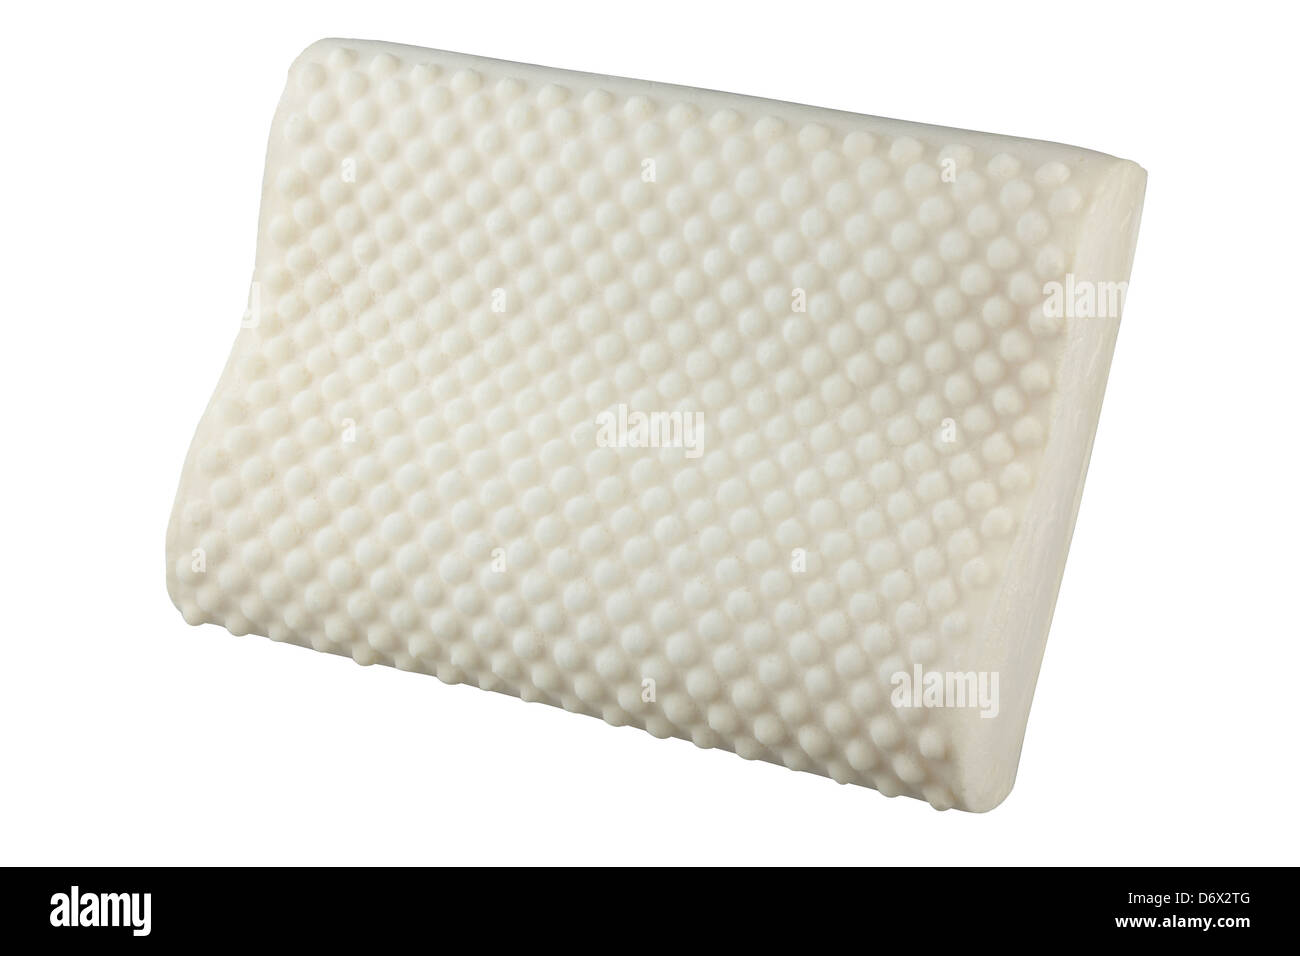 soft latex natural material inside the pillow to protect mite, dust and support your neck Stock Photo